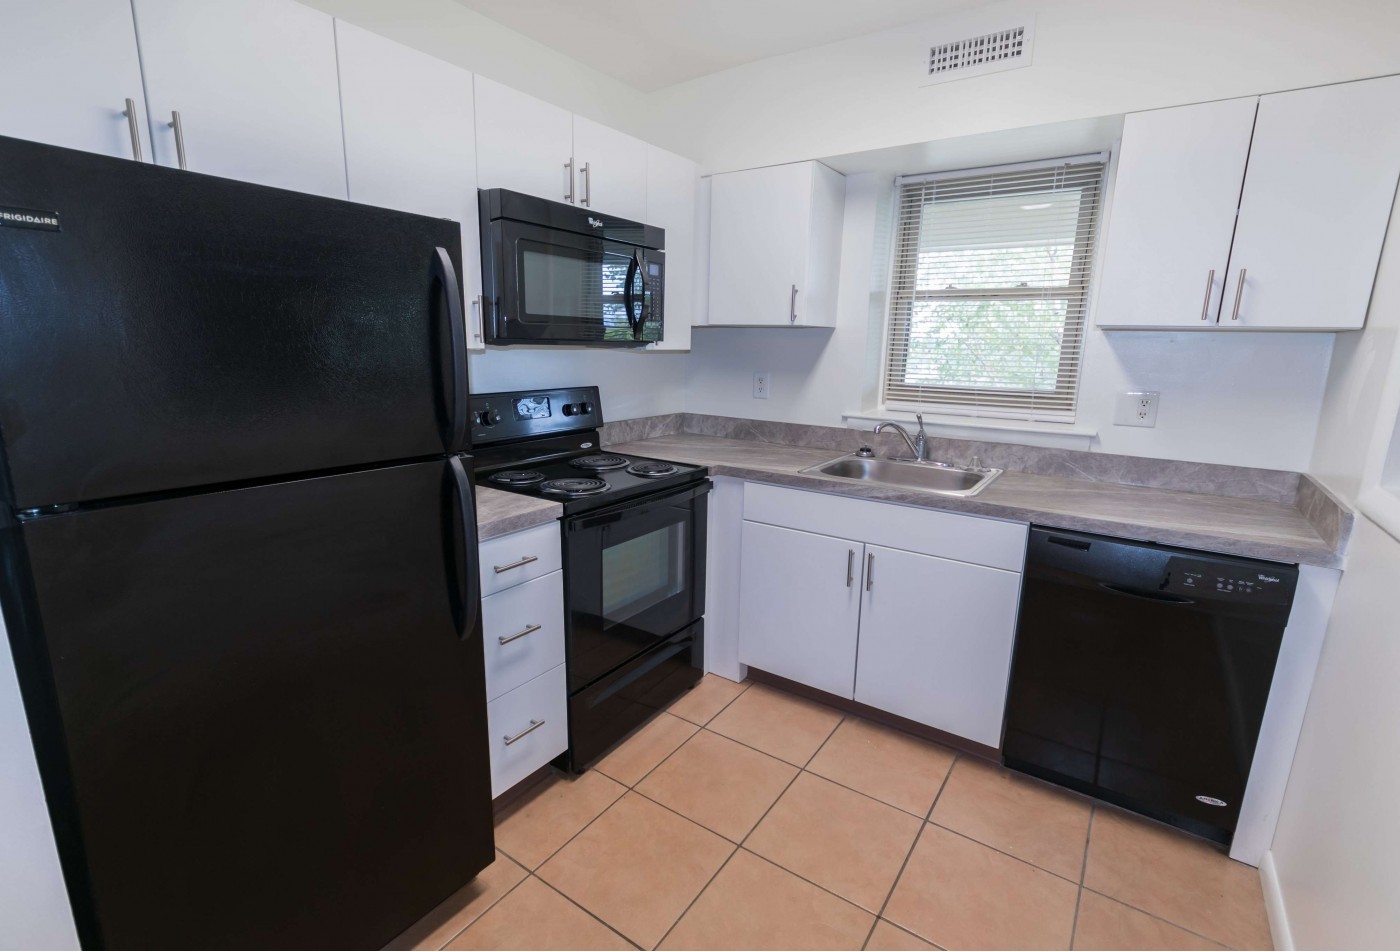 State-of-the-Art Kitchen | Shillington PA Apartment Homes | Governor Mifflin Apartments